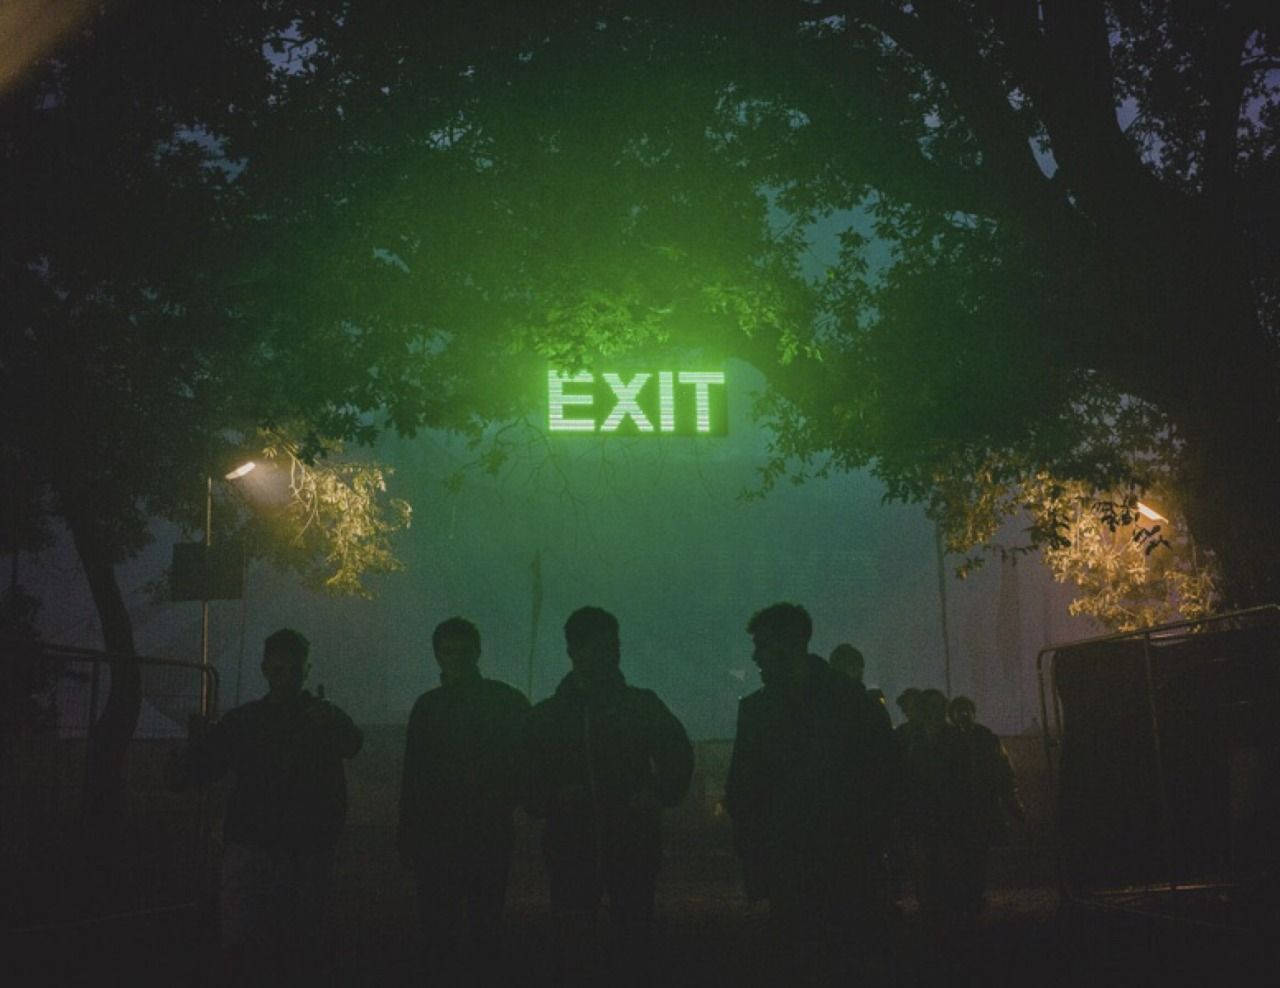 Green Aesthetic Tumblr Friends Exit Wallpaper